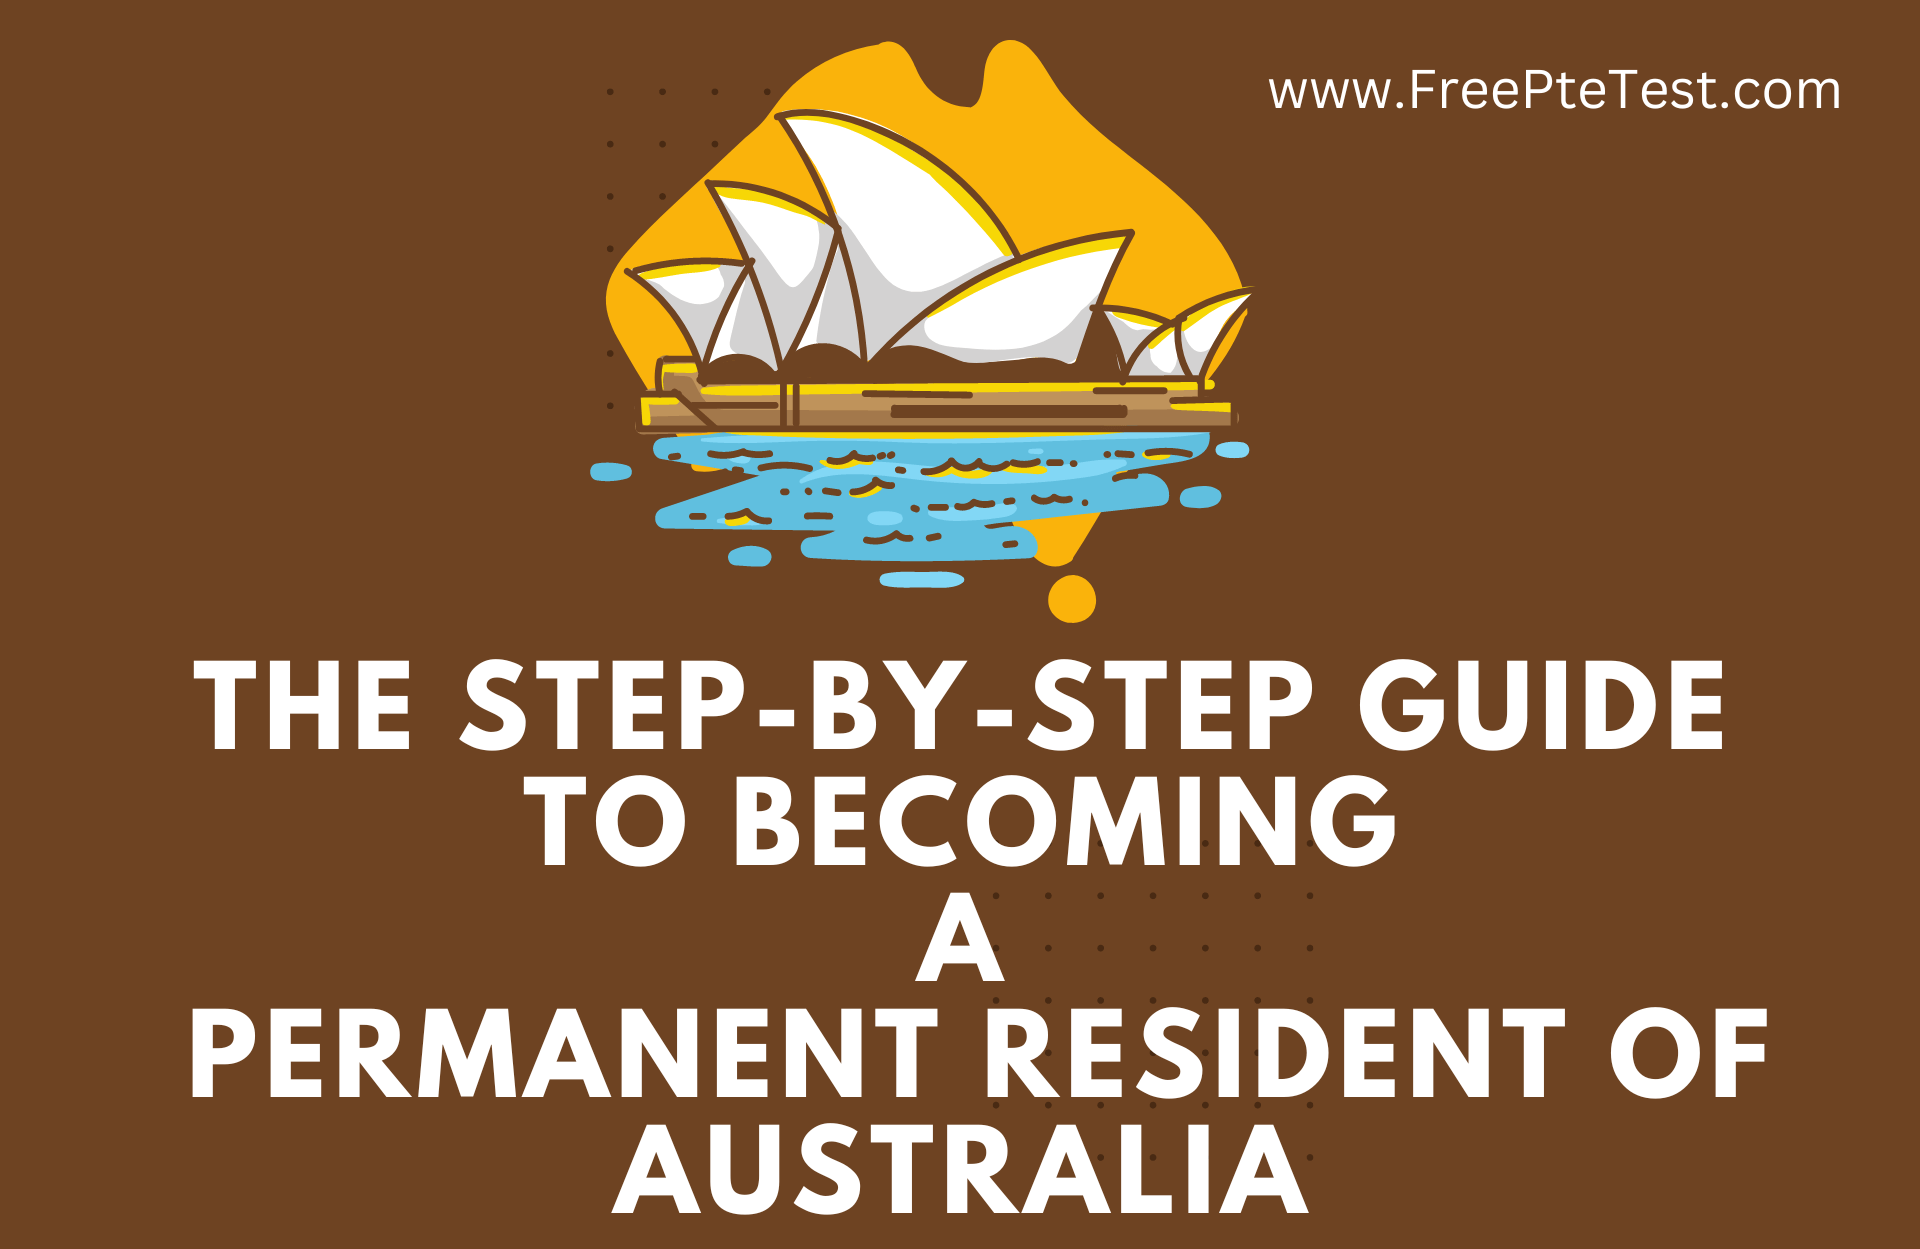 You are currently viewing The Step-by-Step Guide to Becoming a Permanent Resident of Australia